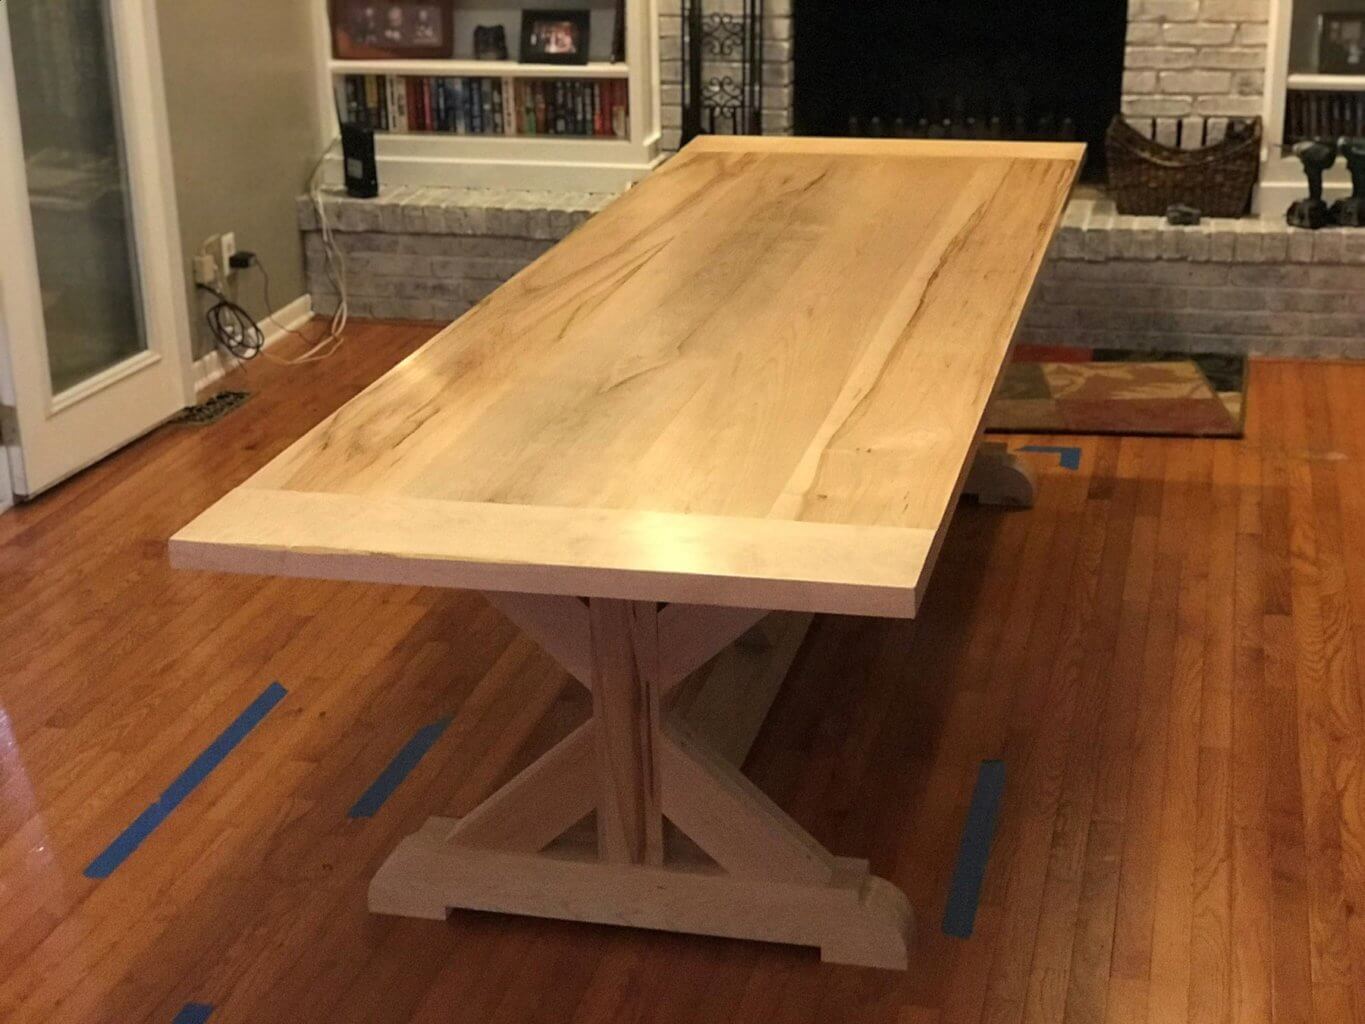 Pa Made Maple Dining Room Table 1940s